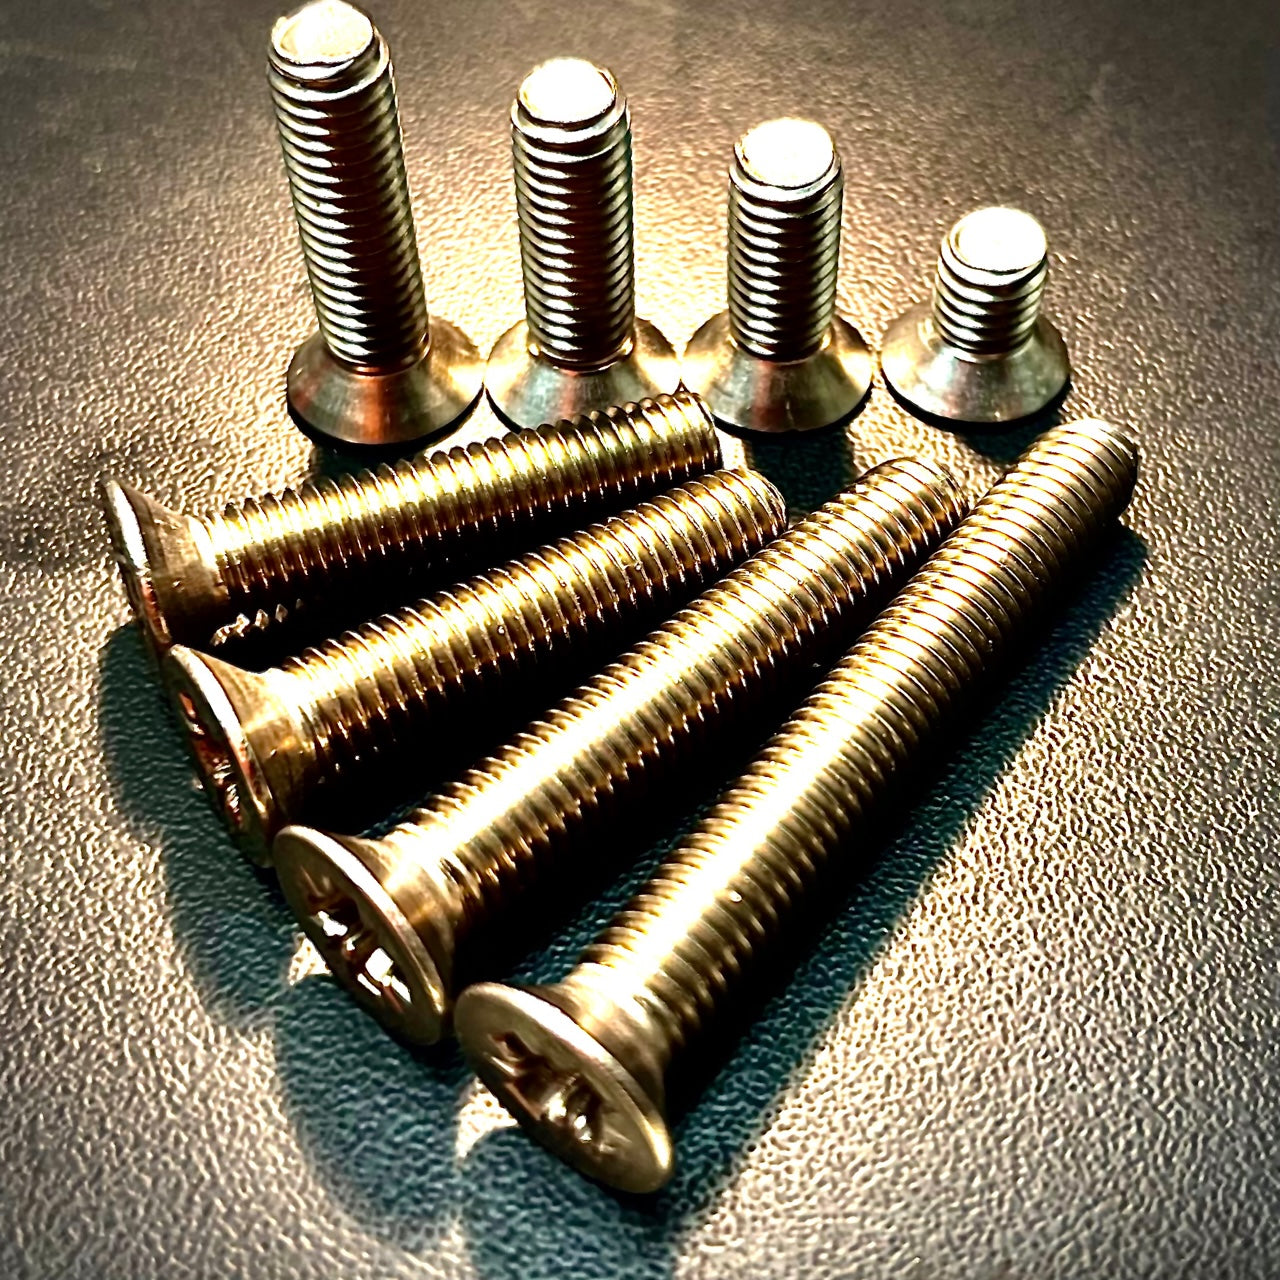 M6 x Under 50mm Machine Screws Pozi Countersunk A2/304 Stainless Steel - Fixaball Ltd. Fixings and Fasteners UK